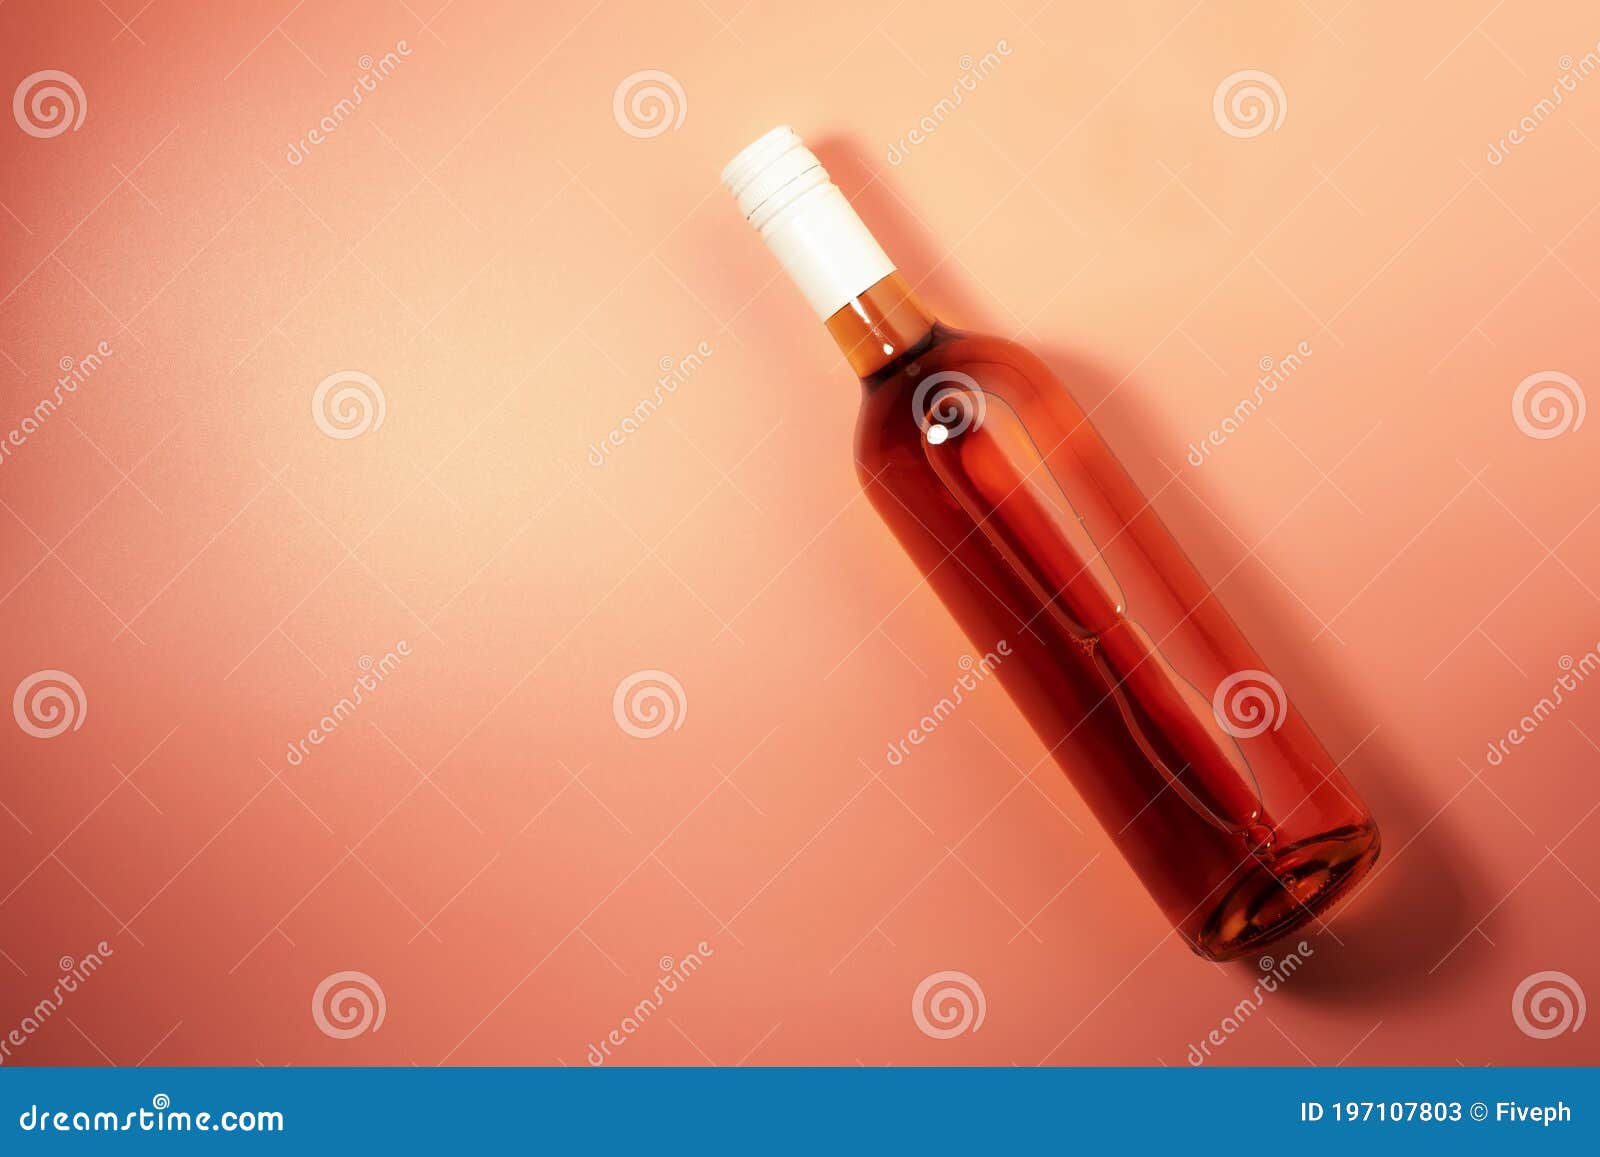 rose wine bottle on pink bakcground. rosado, rosato or blush wine tasting in wineshop, bar concept. copy space, top view